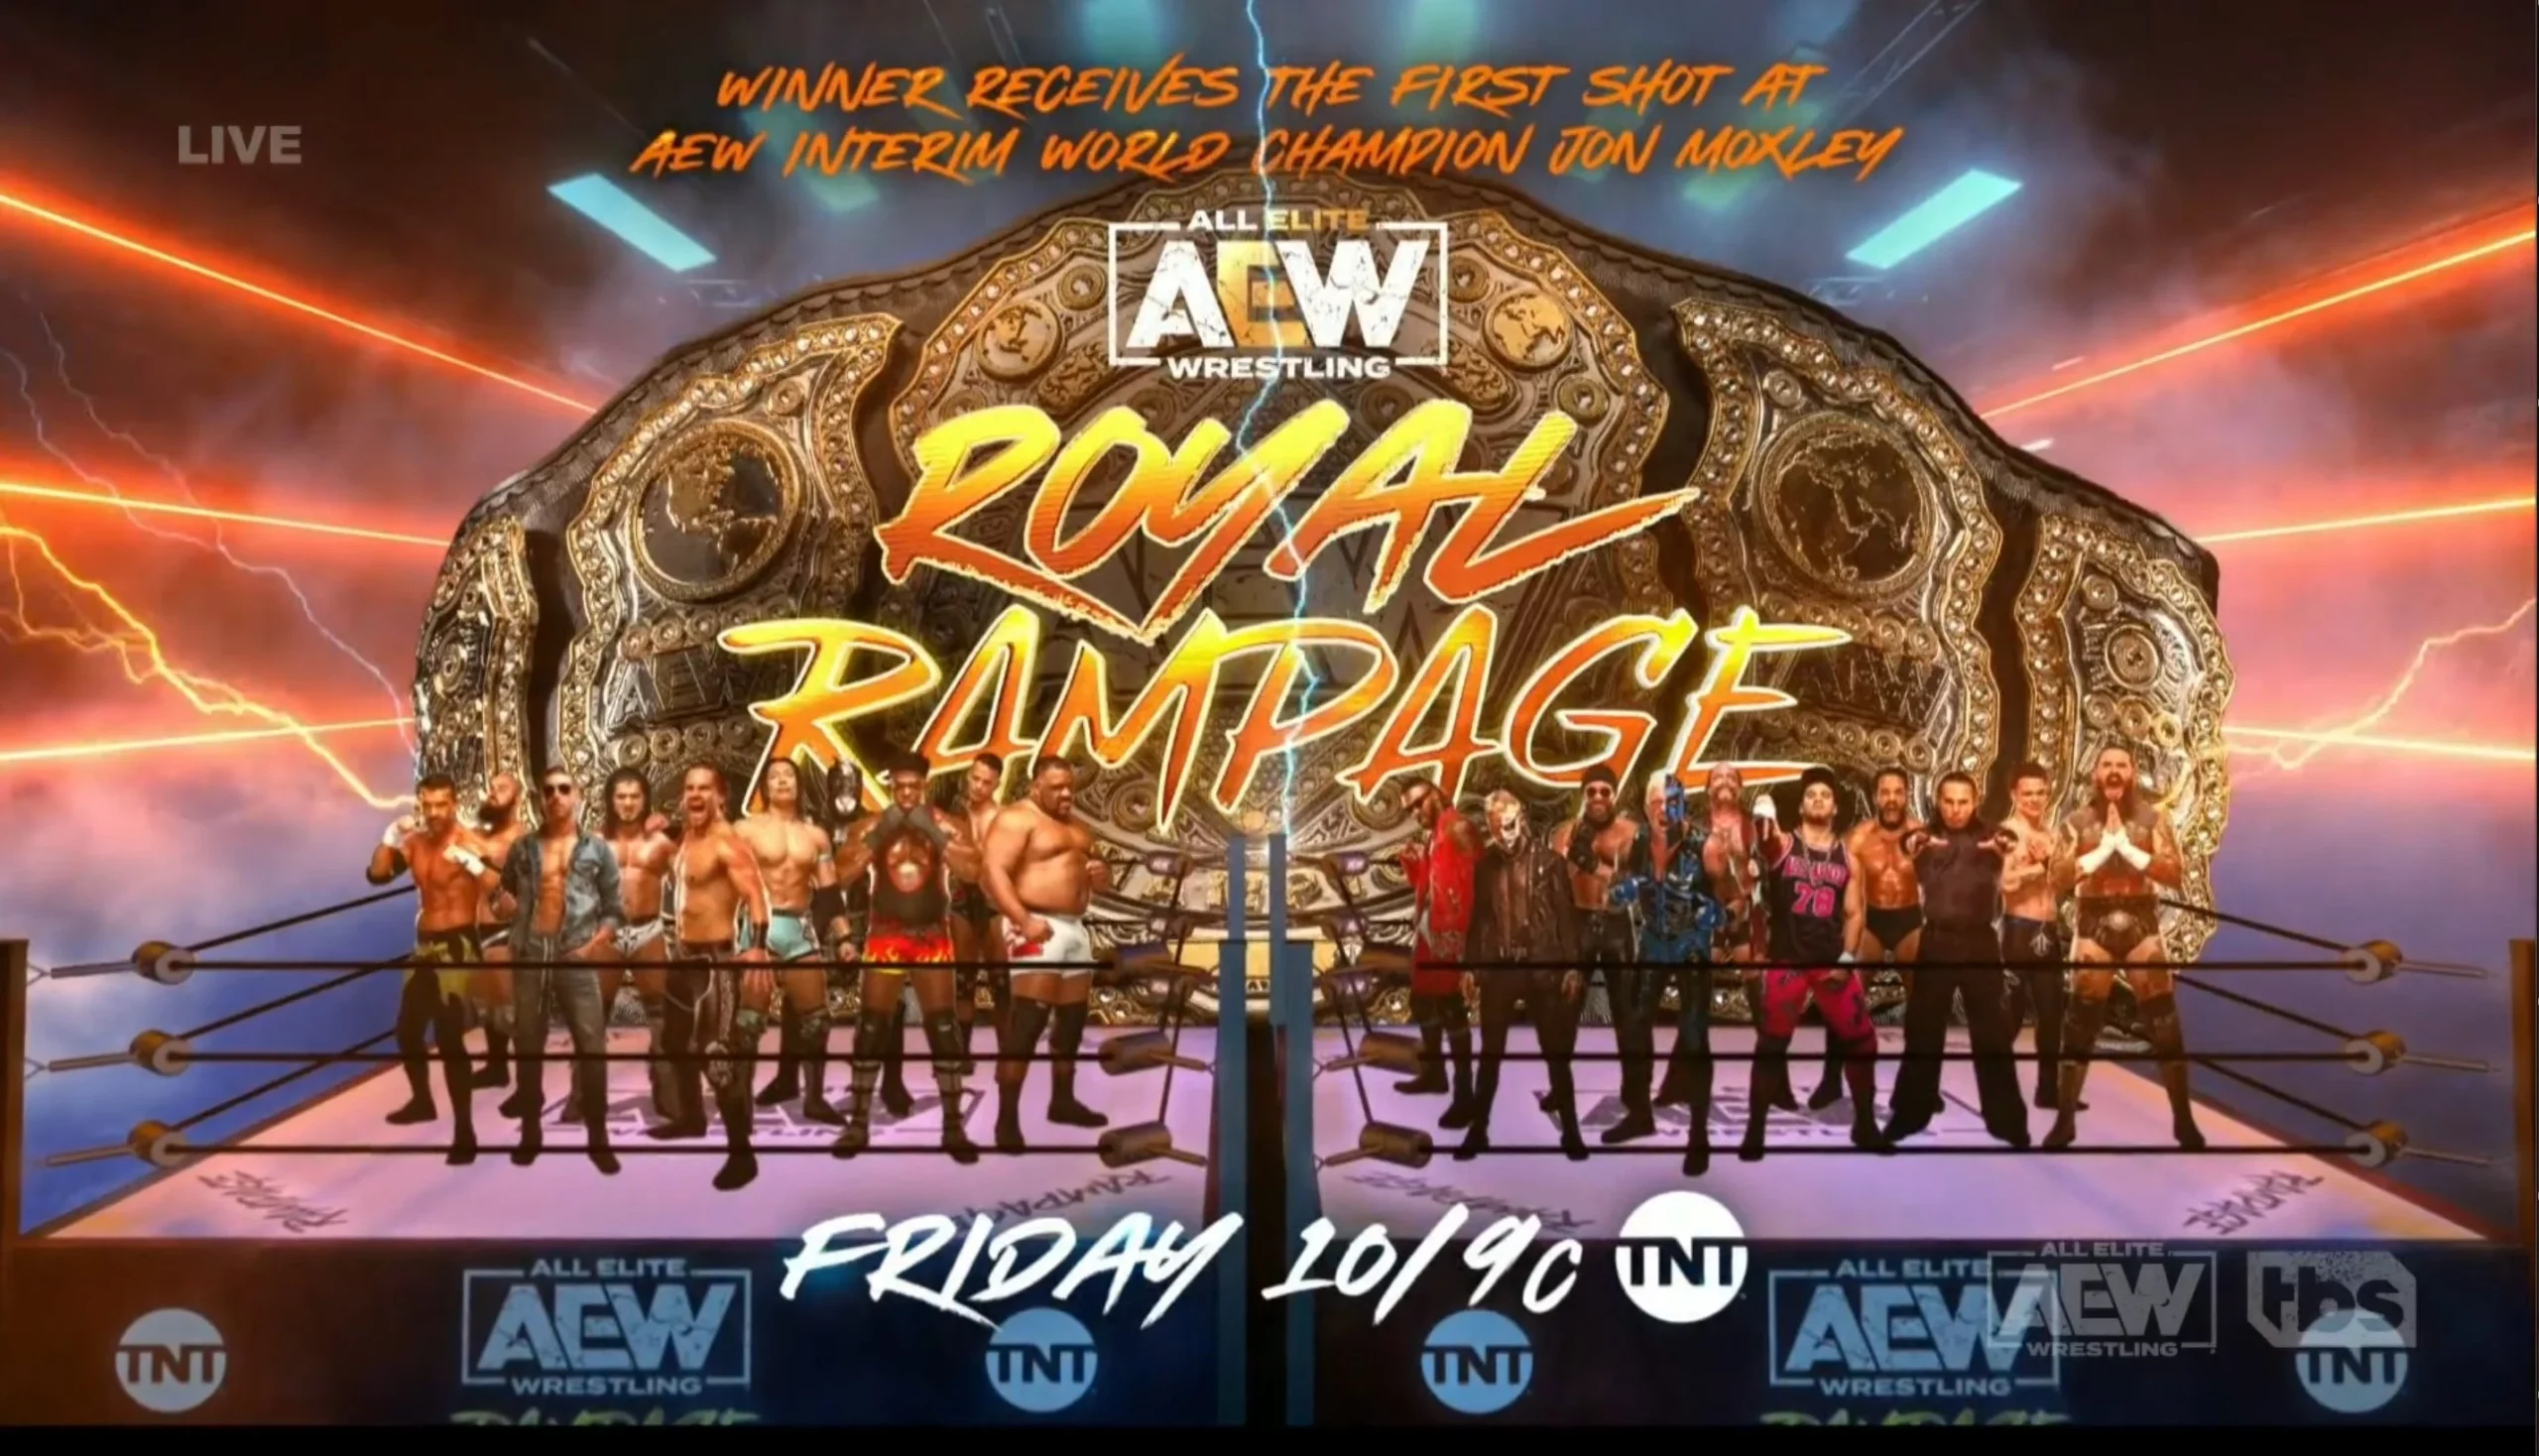 Huge Matches Including ‘Royal Rampage’ Announced For AEW Rampage